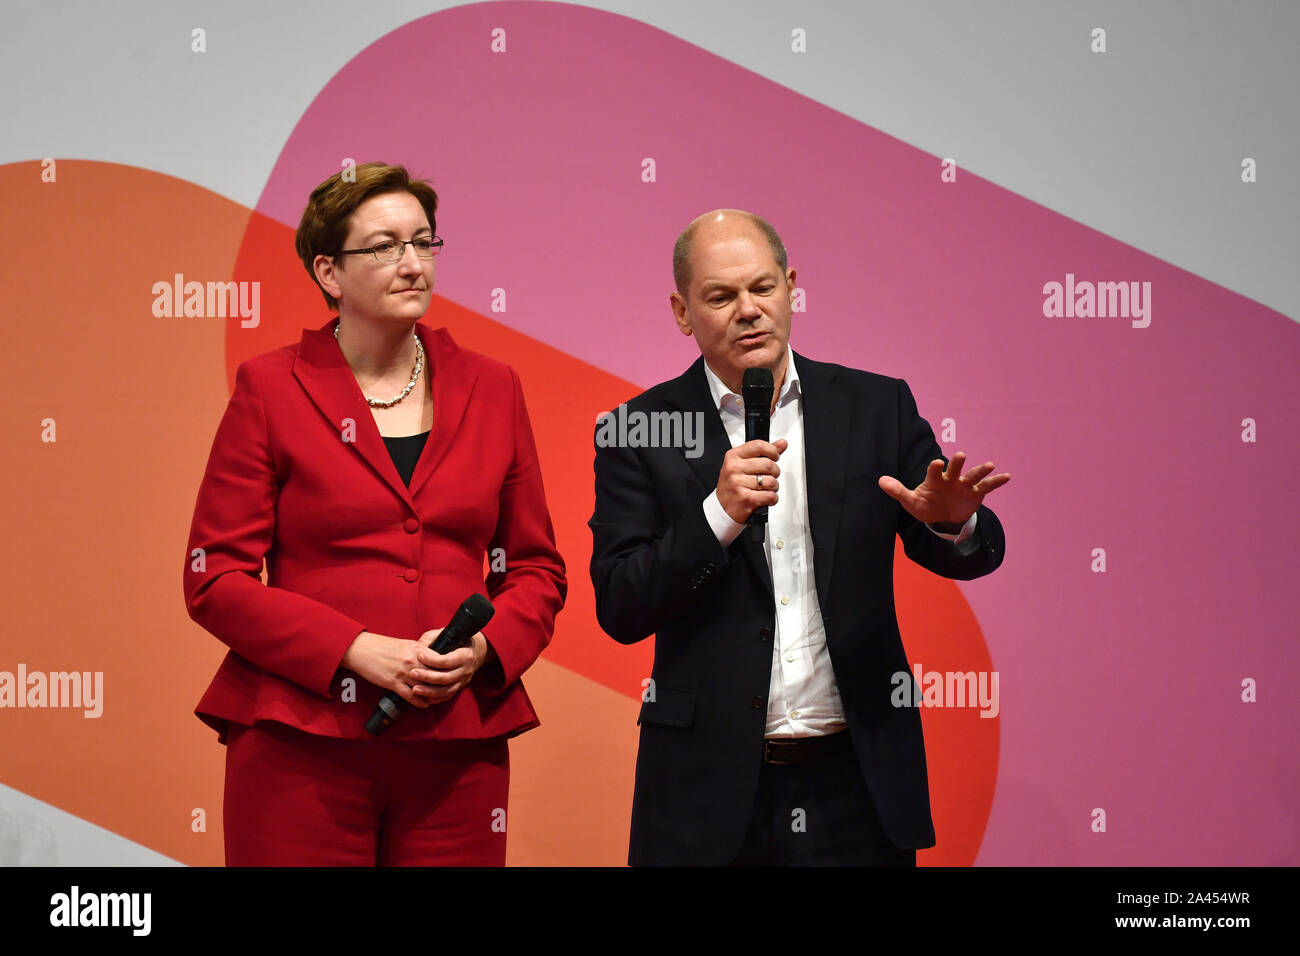 Olaf SCHOLZ, Klara GEYWITZ. Regional Conference for the presentation of the candidates for the SPD Party Presidency, Loewenbraeukeller Muenchen on 12.10.2019. | usage worldwide Stock Photo